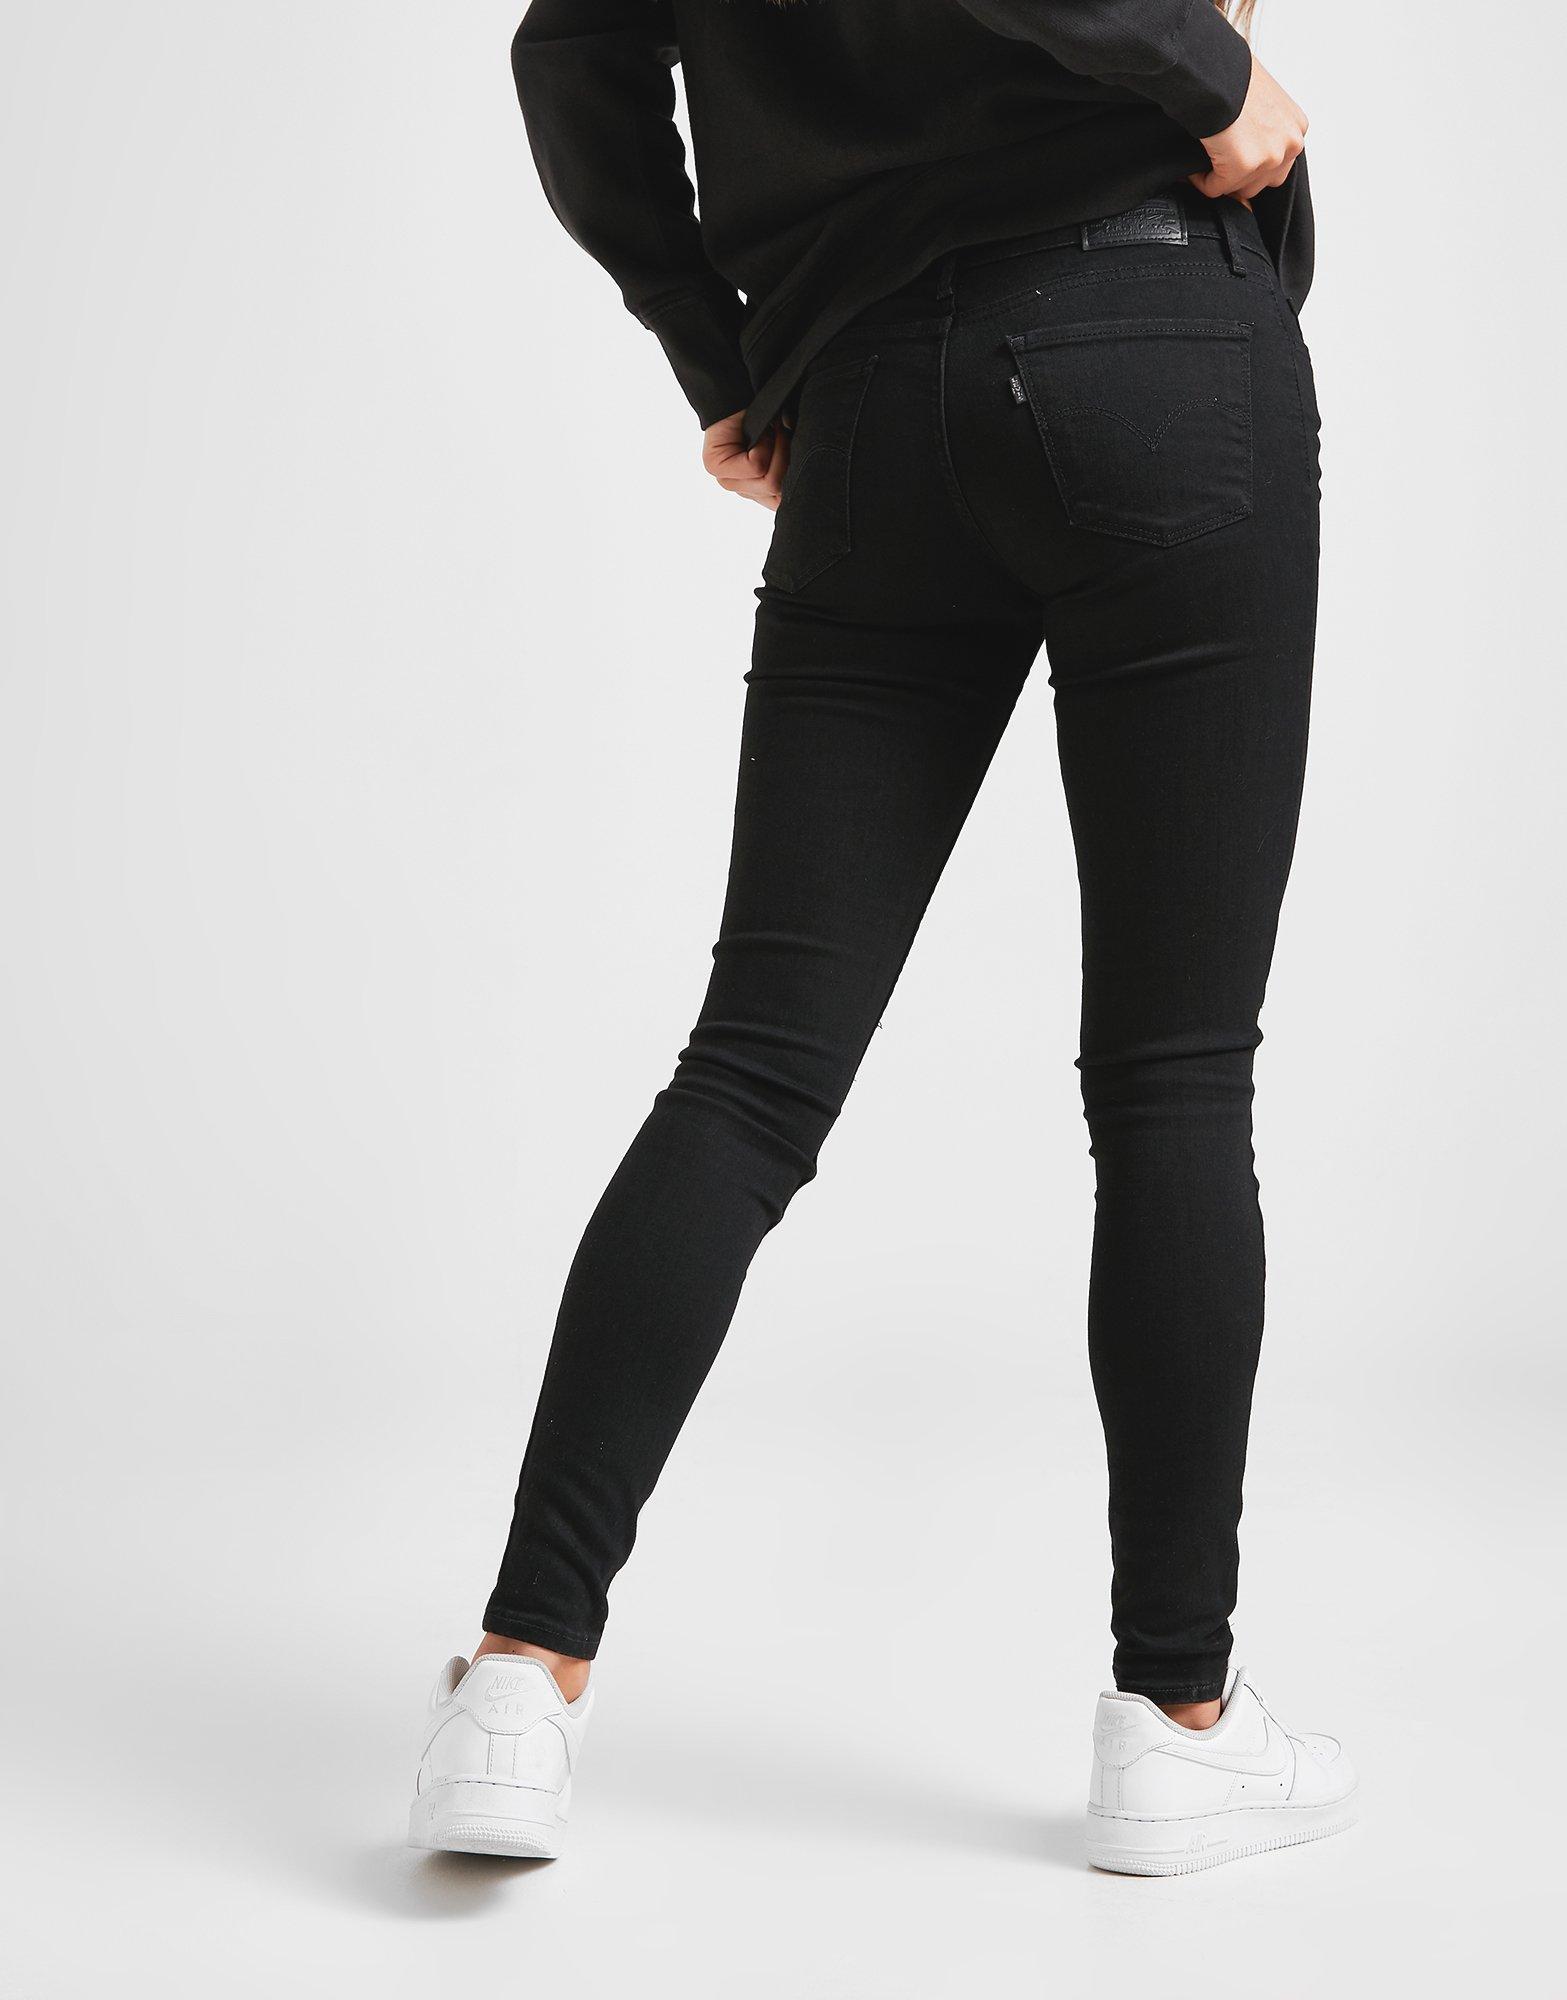 levis 710 super skinny review